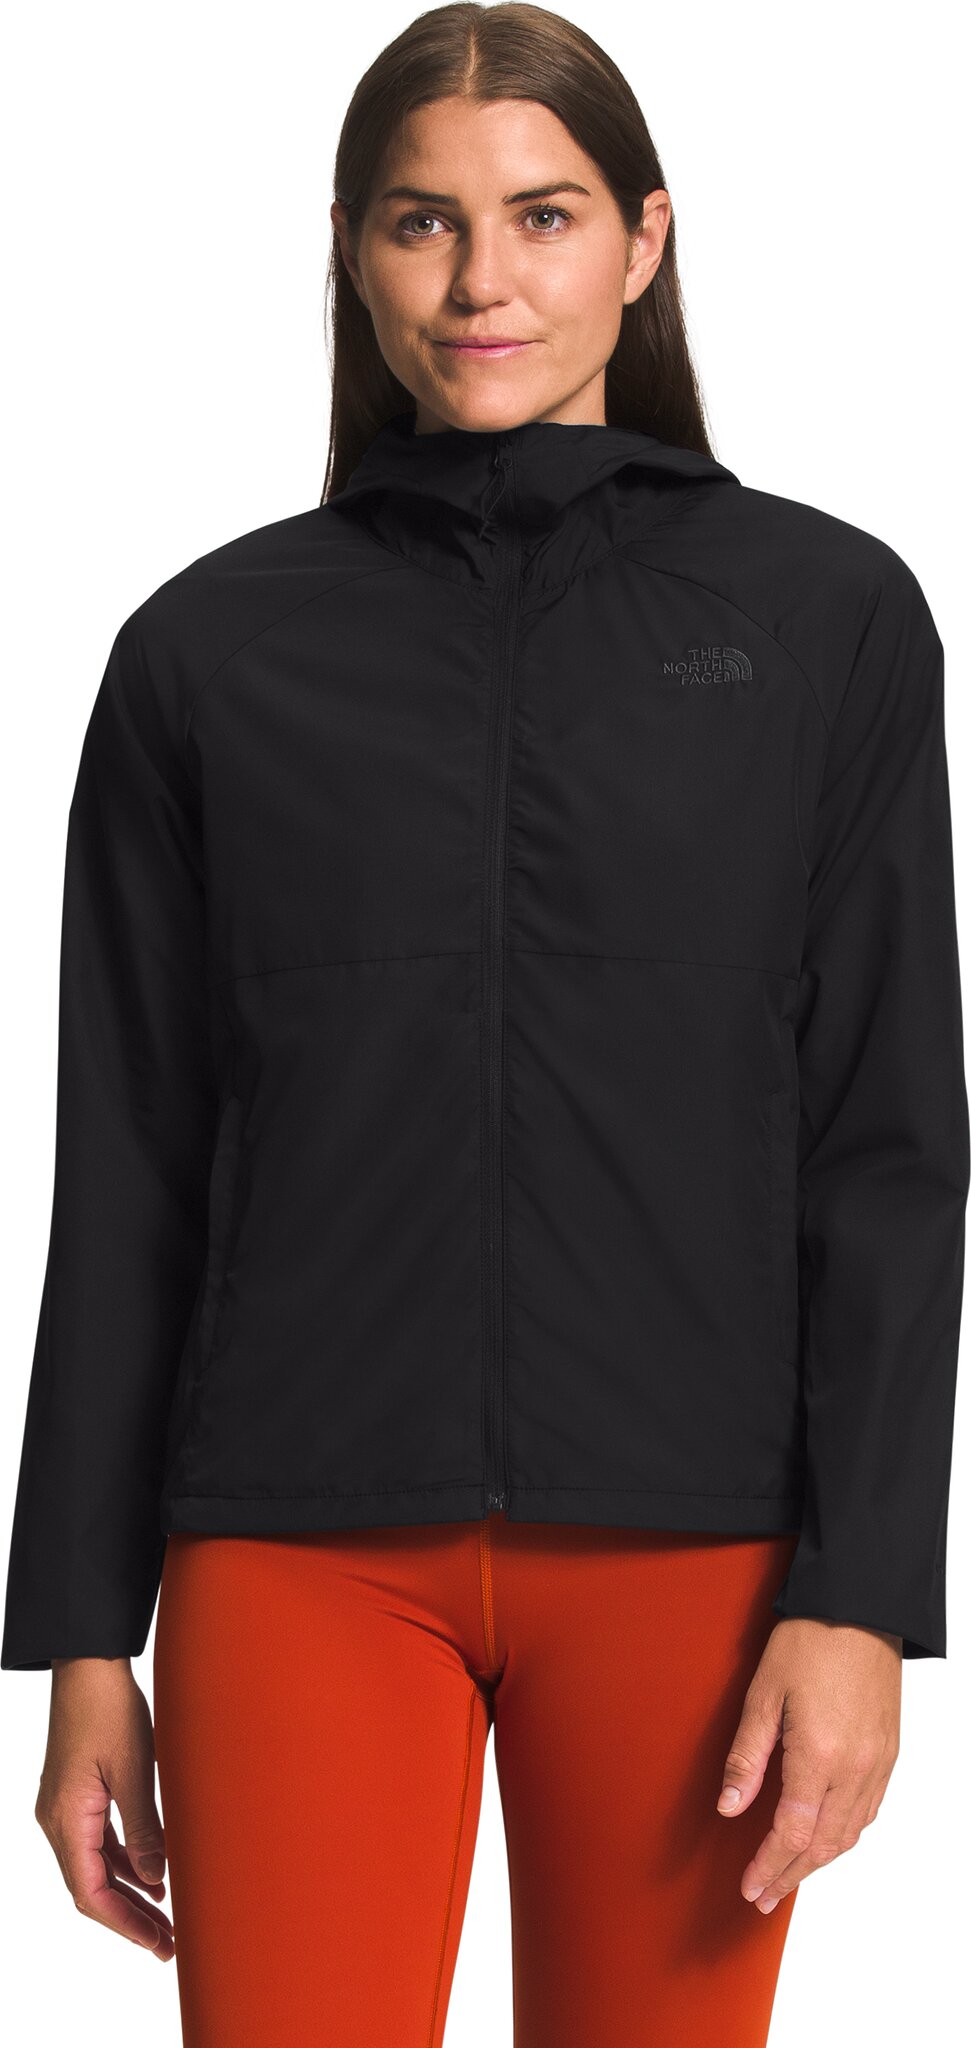 Choose your new Women's Tek Gear® Essential Hooded Jacket and get 20% off